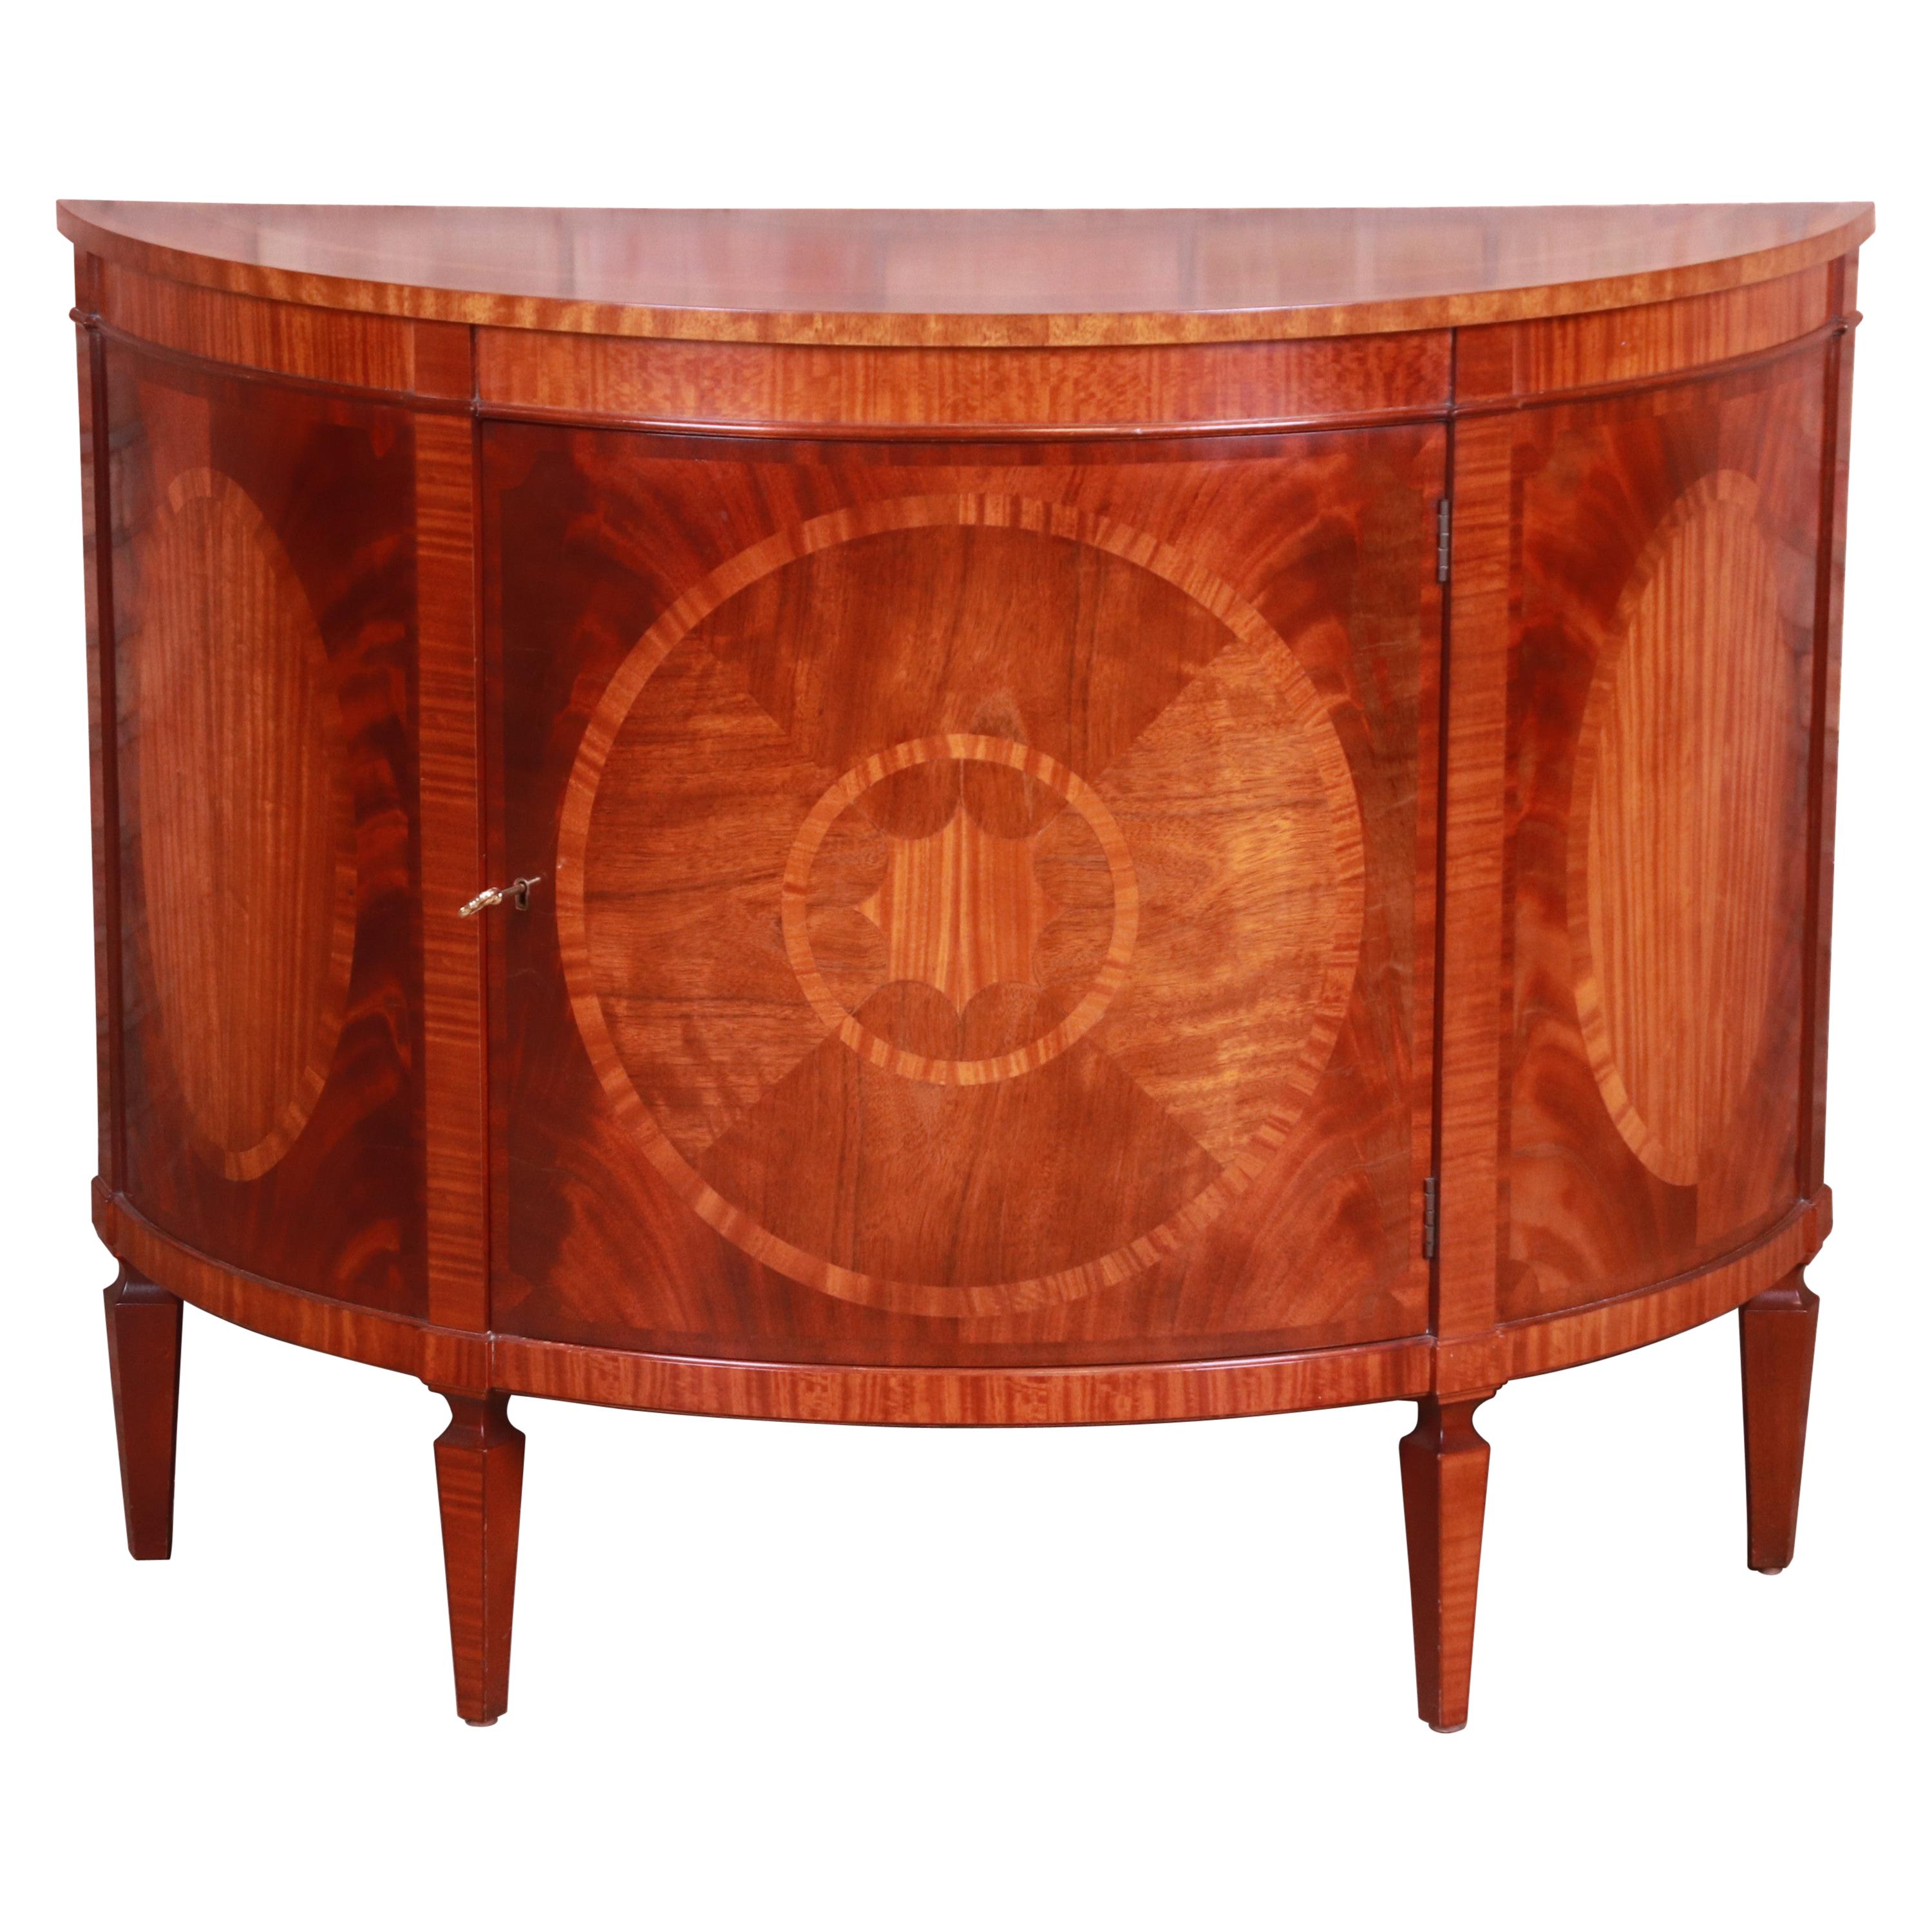 Baker Furniture Federal Inlaid Mahogany Demilune Cabinet or Sideboard